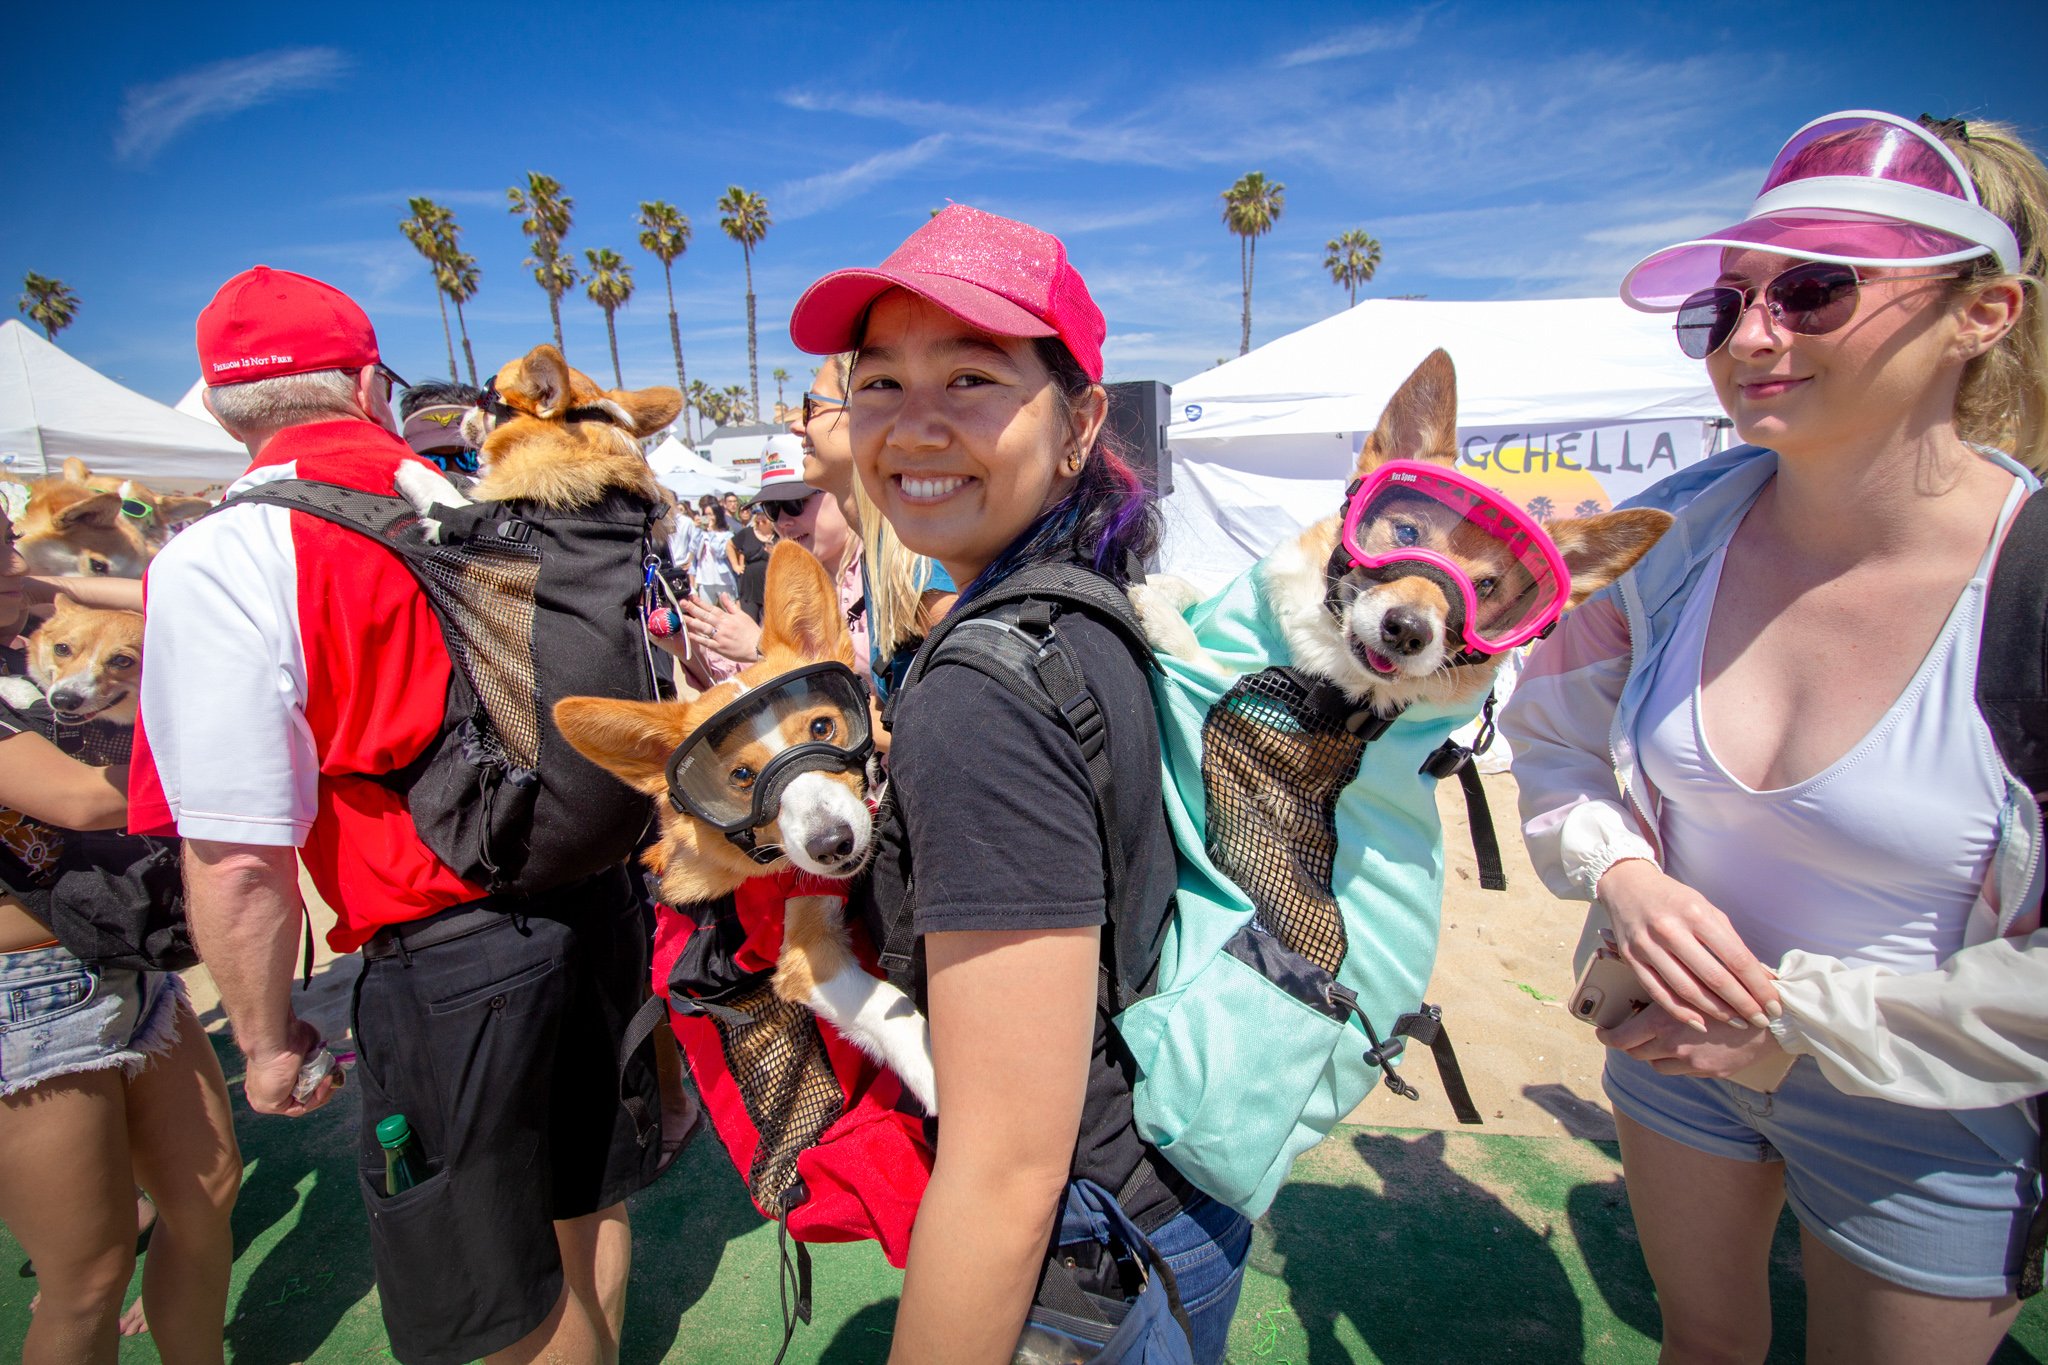 Orange County Pet and Dog Photography - by Steamer Lee - Corgi Beach Day Spring 2019 - Southern Caliornia 30 (1).JPG